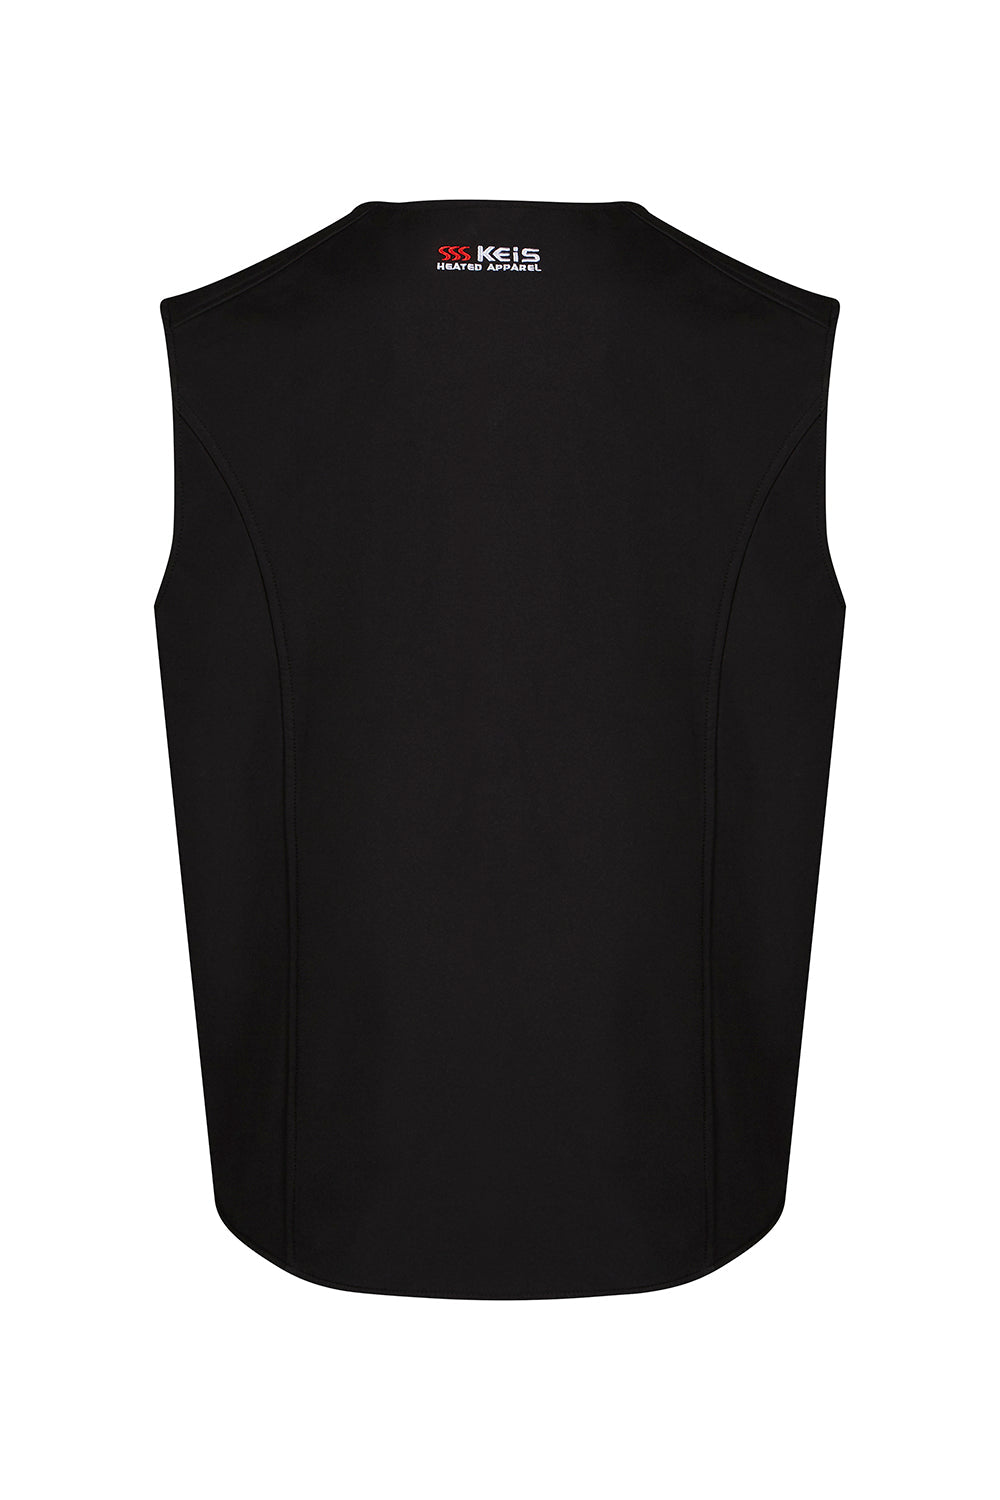 Keis heated vest black with red piping and logo